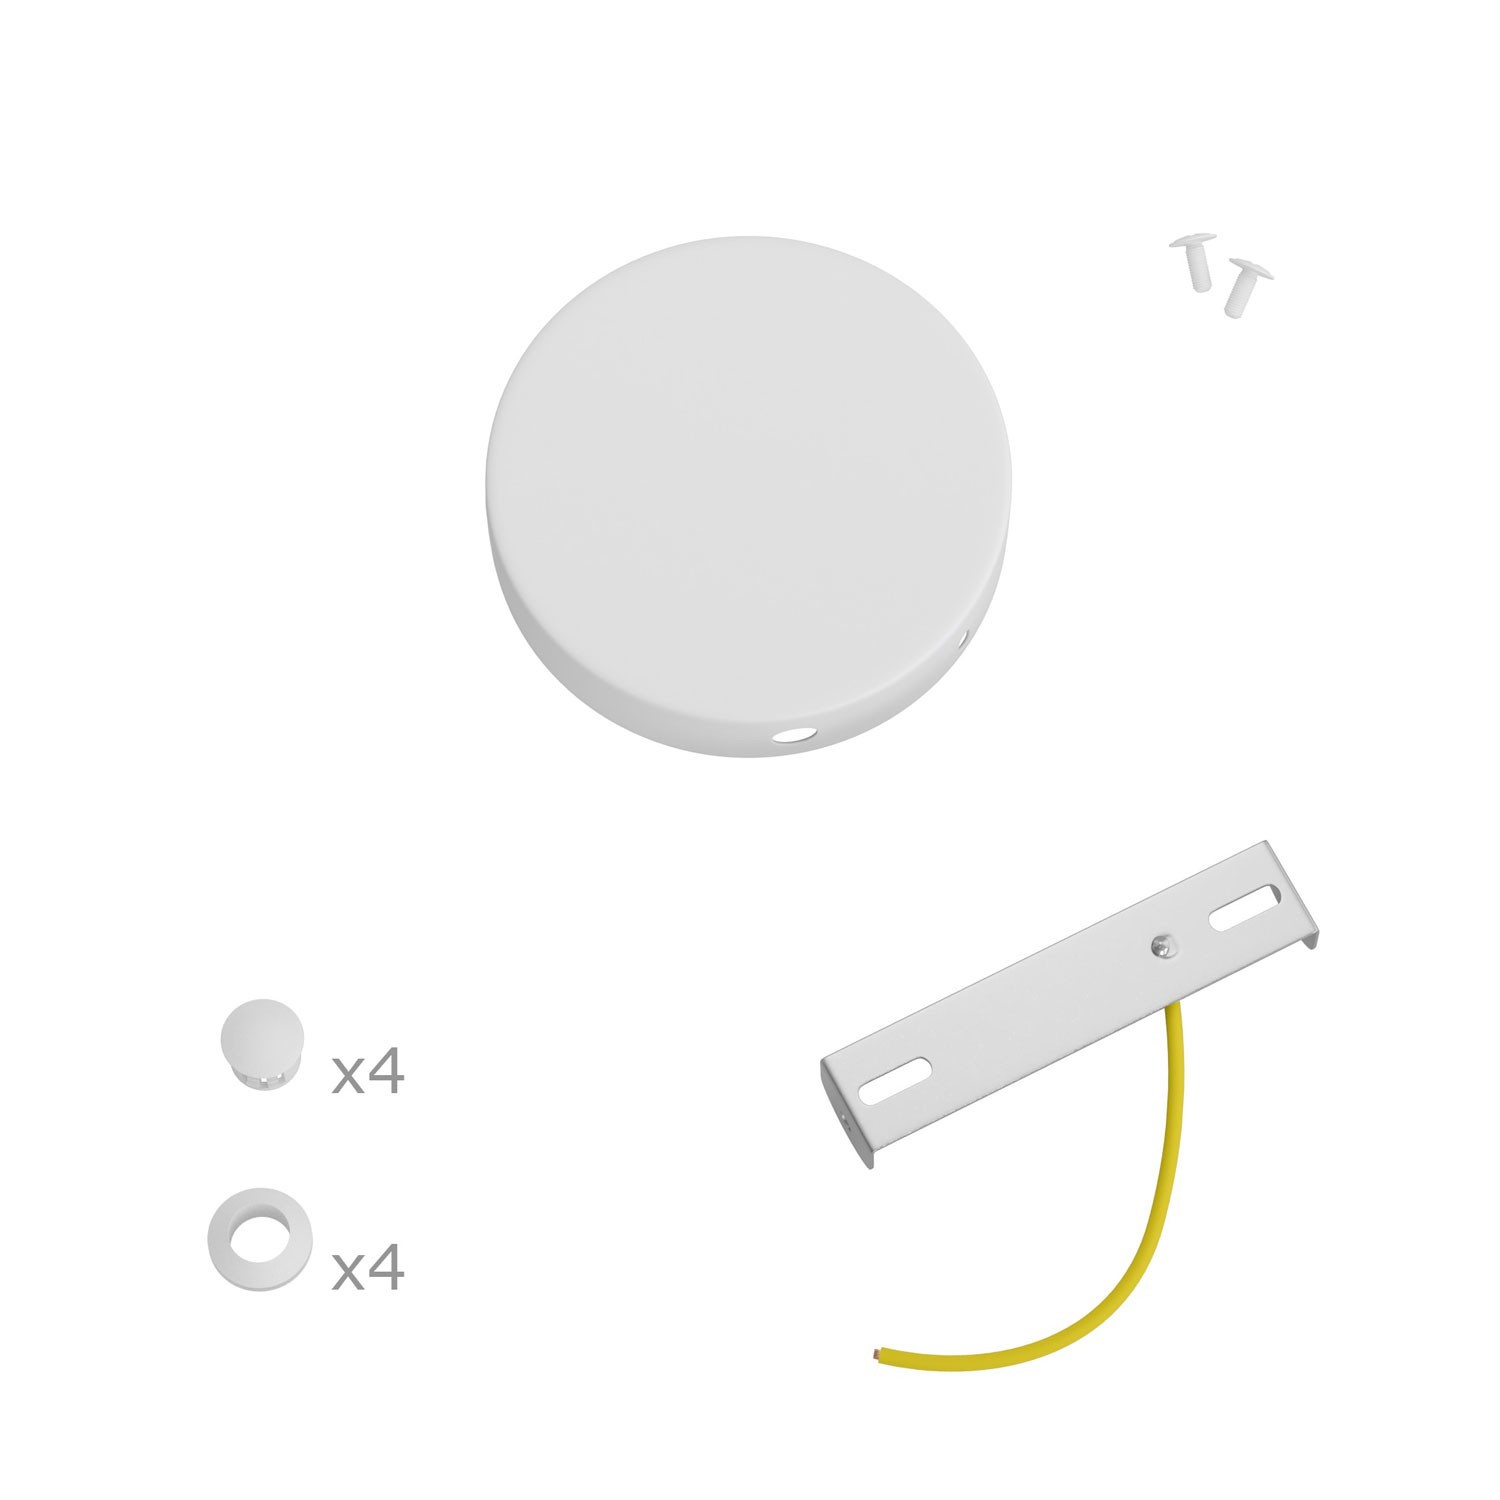 WAGO connector kit compatible with 3x cable for 5 hole ceiling rose